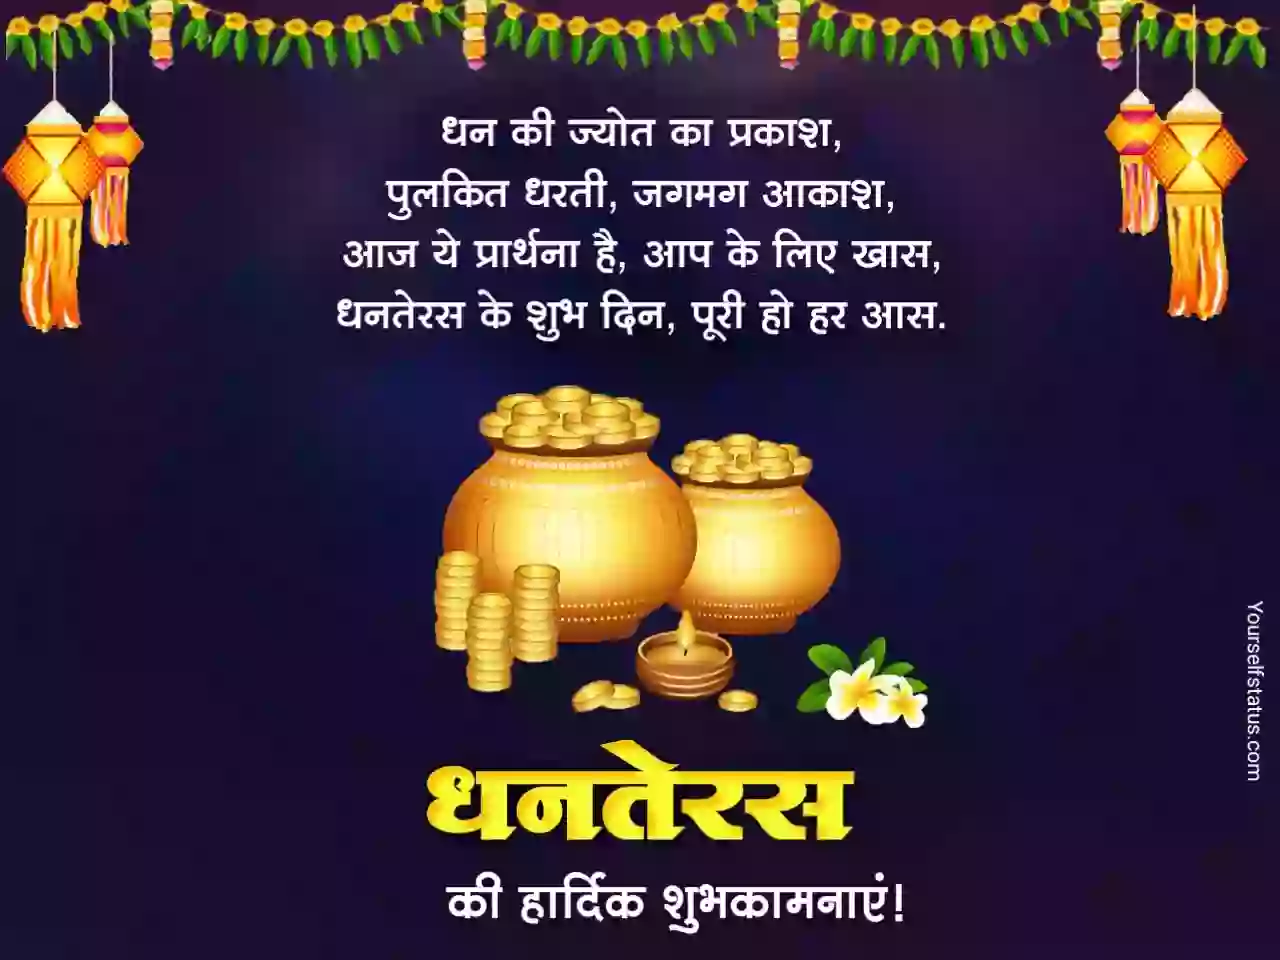 Dhanteras wishes in hindi